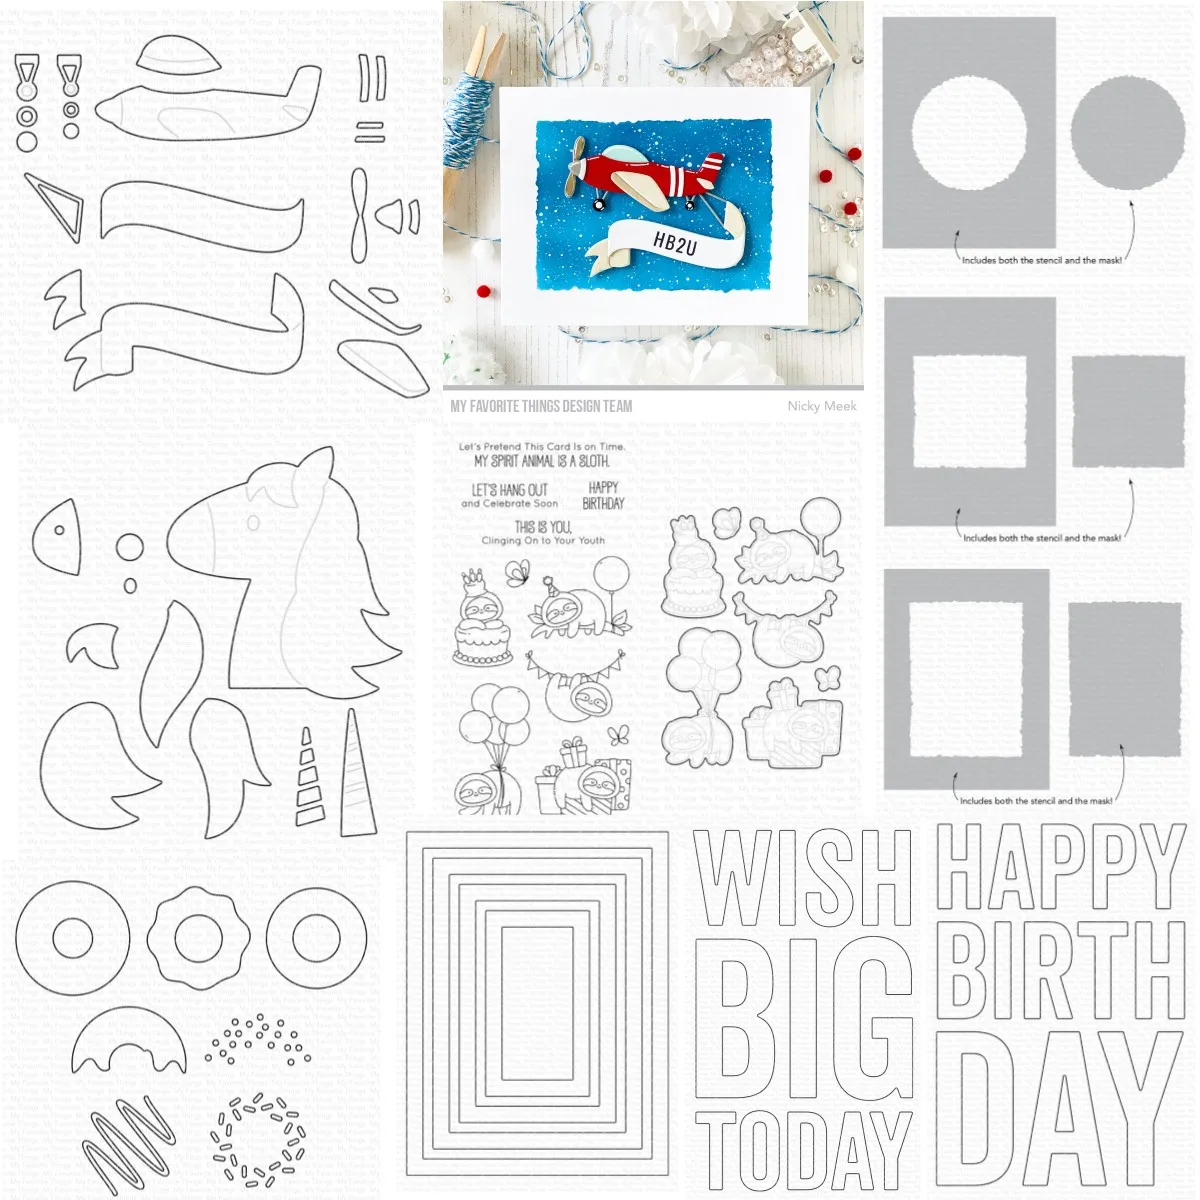 

Celebrate Birthday Gift Balloon Metal Cutting Dies Clear Stamps Stencil For Decorating Scrapbook Diy Card Album Embossing Craft